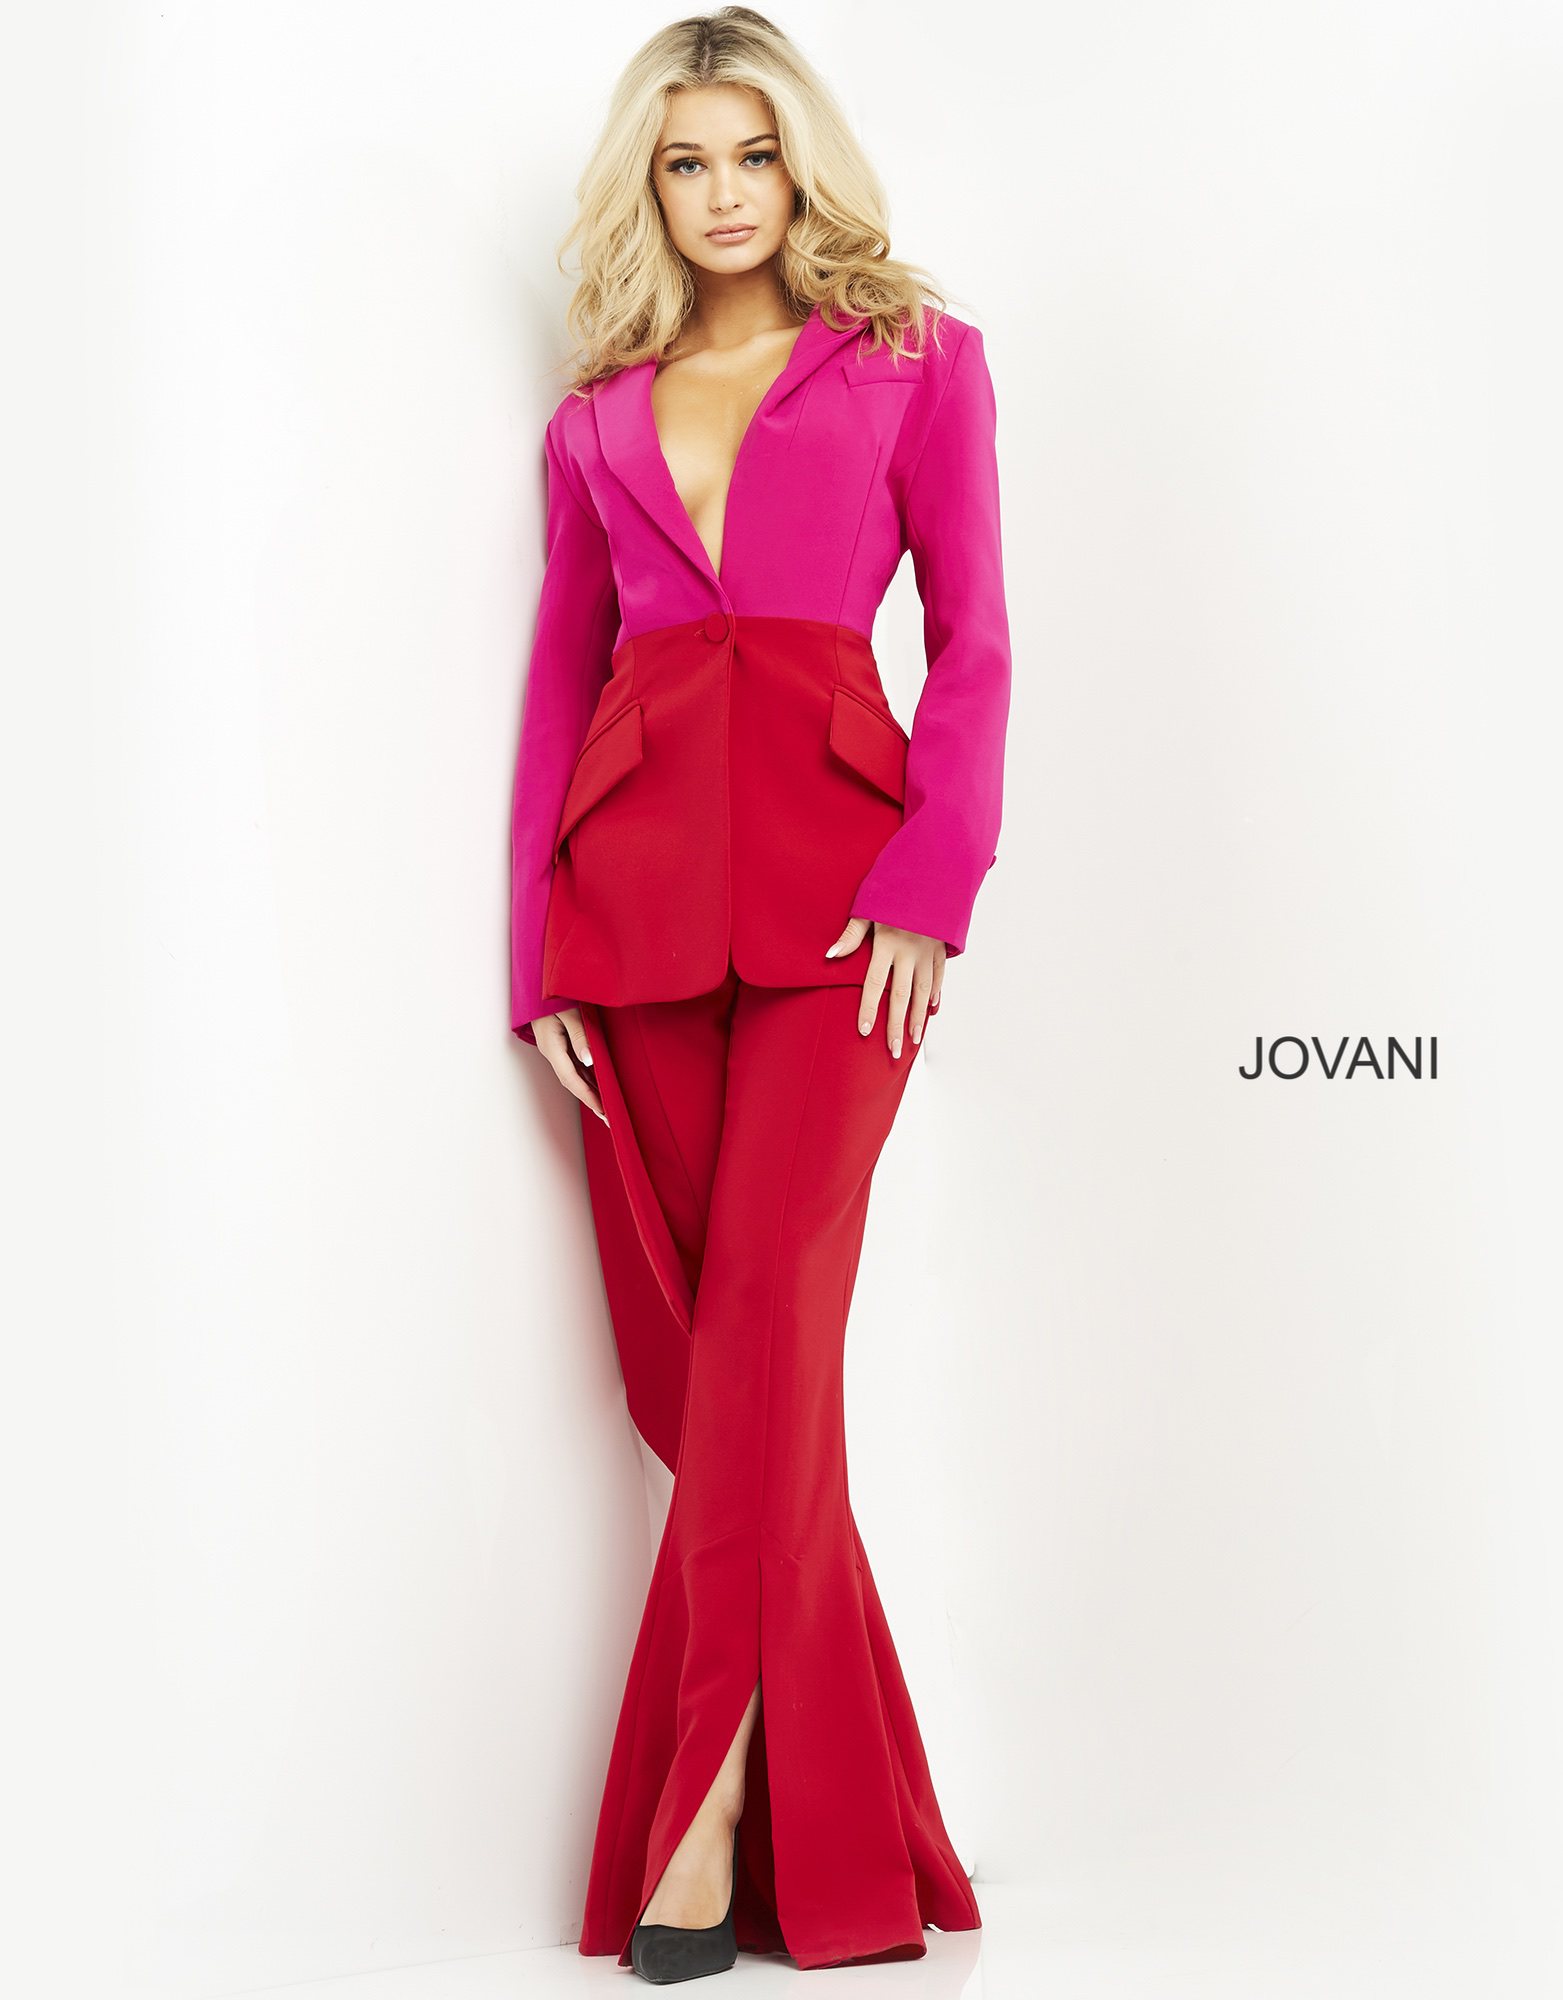 Jovani 04148 Red Fuchsia Contemporary Pant Suit